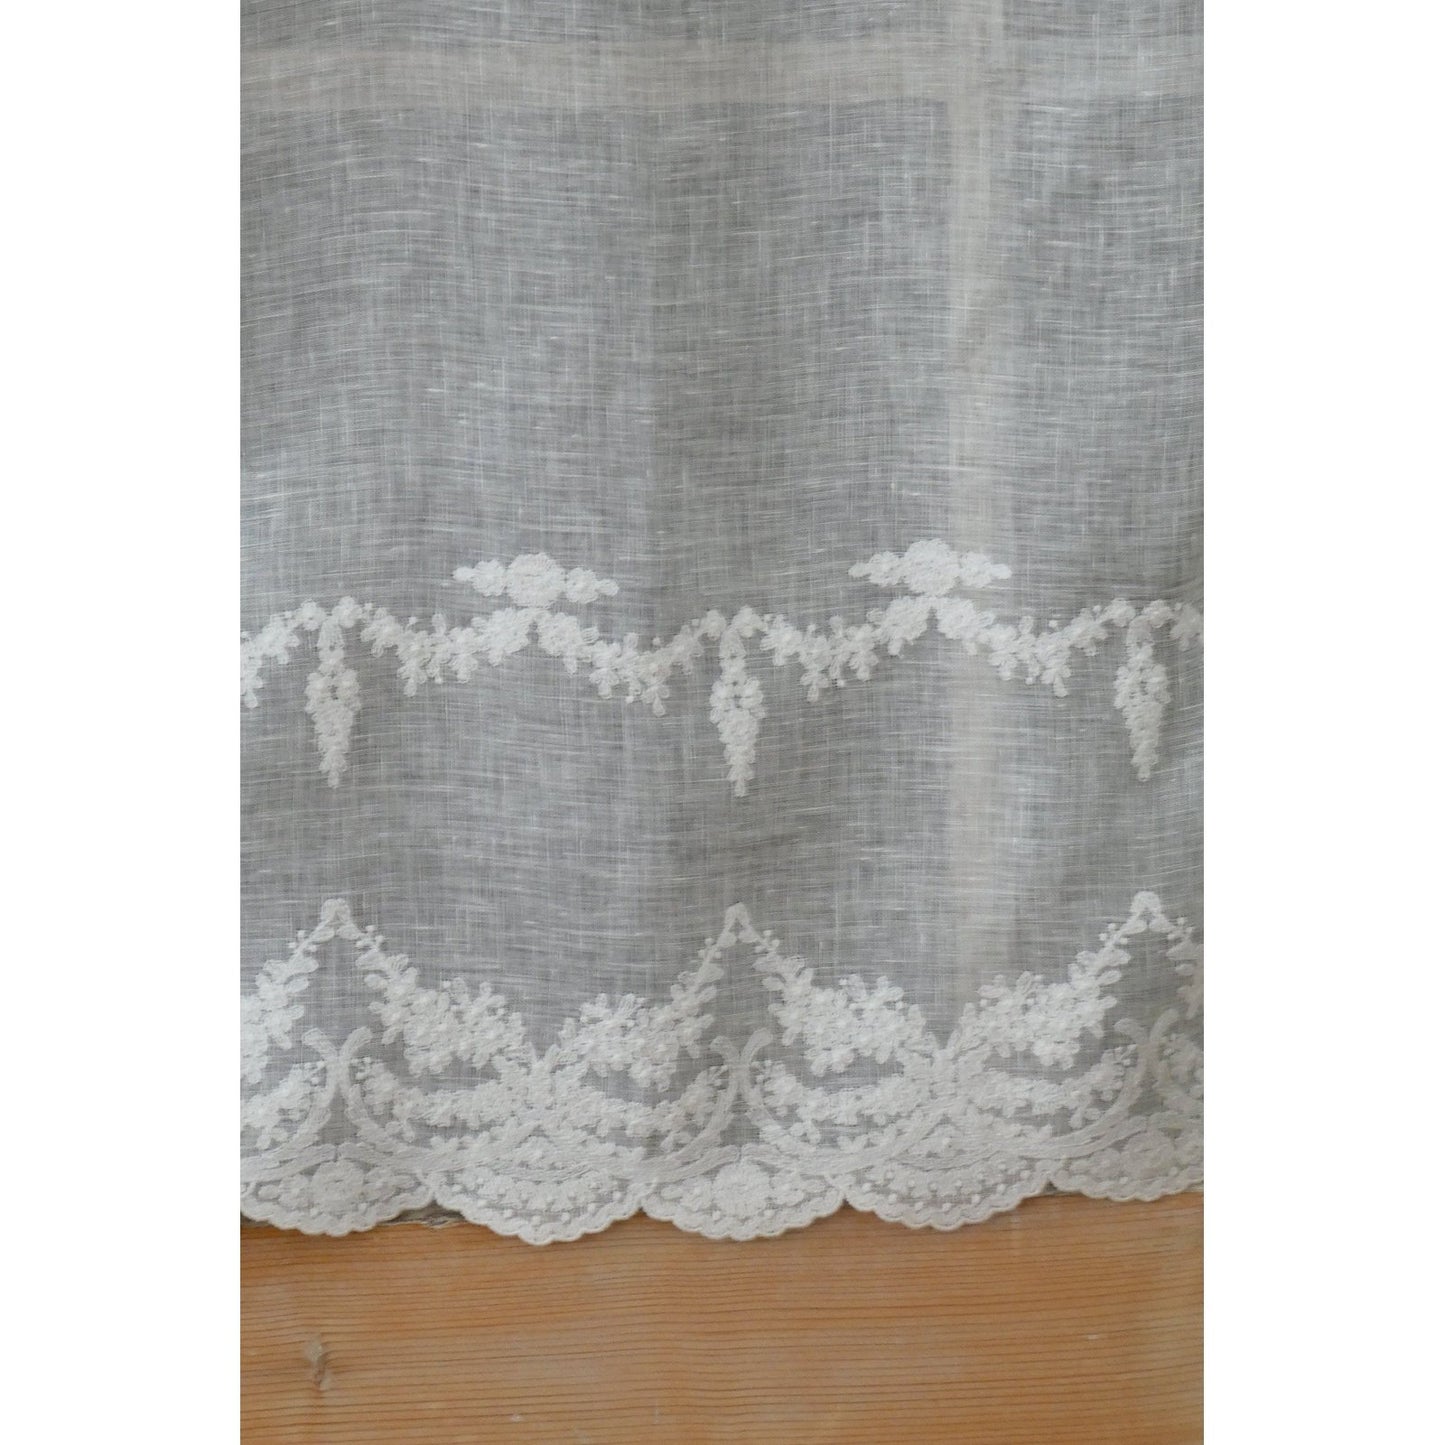 Off-white linen curtain with two large embroidered scalloped borders.